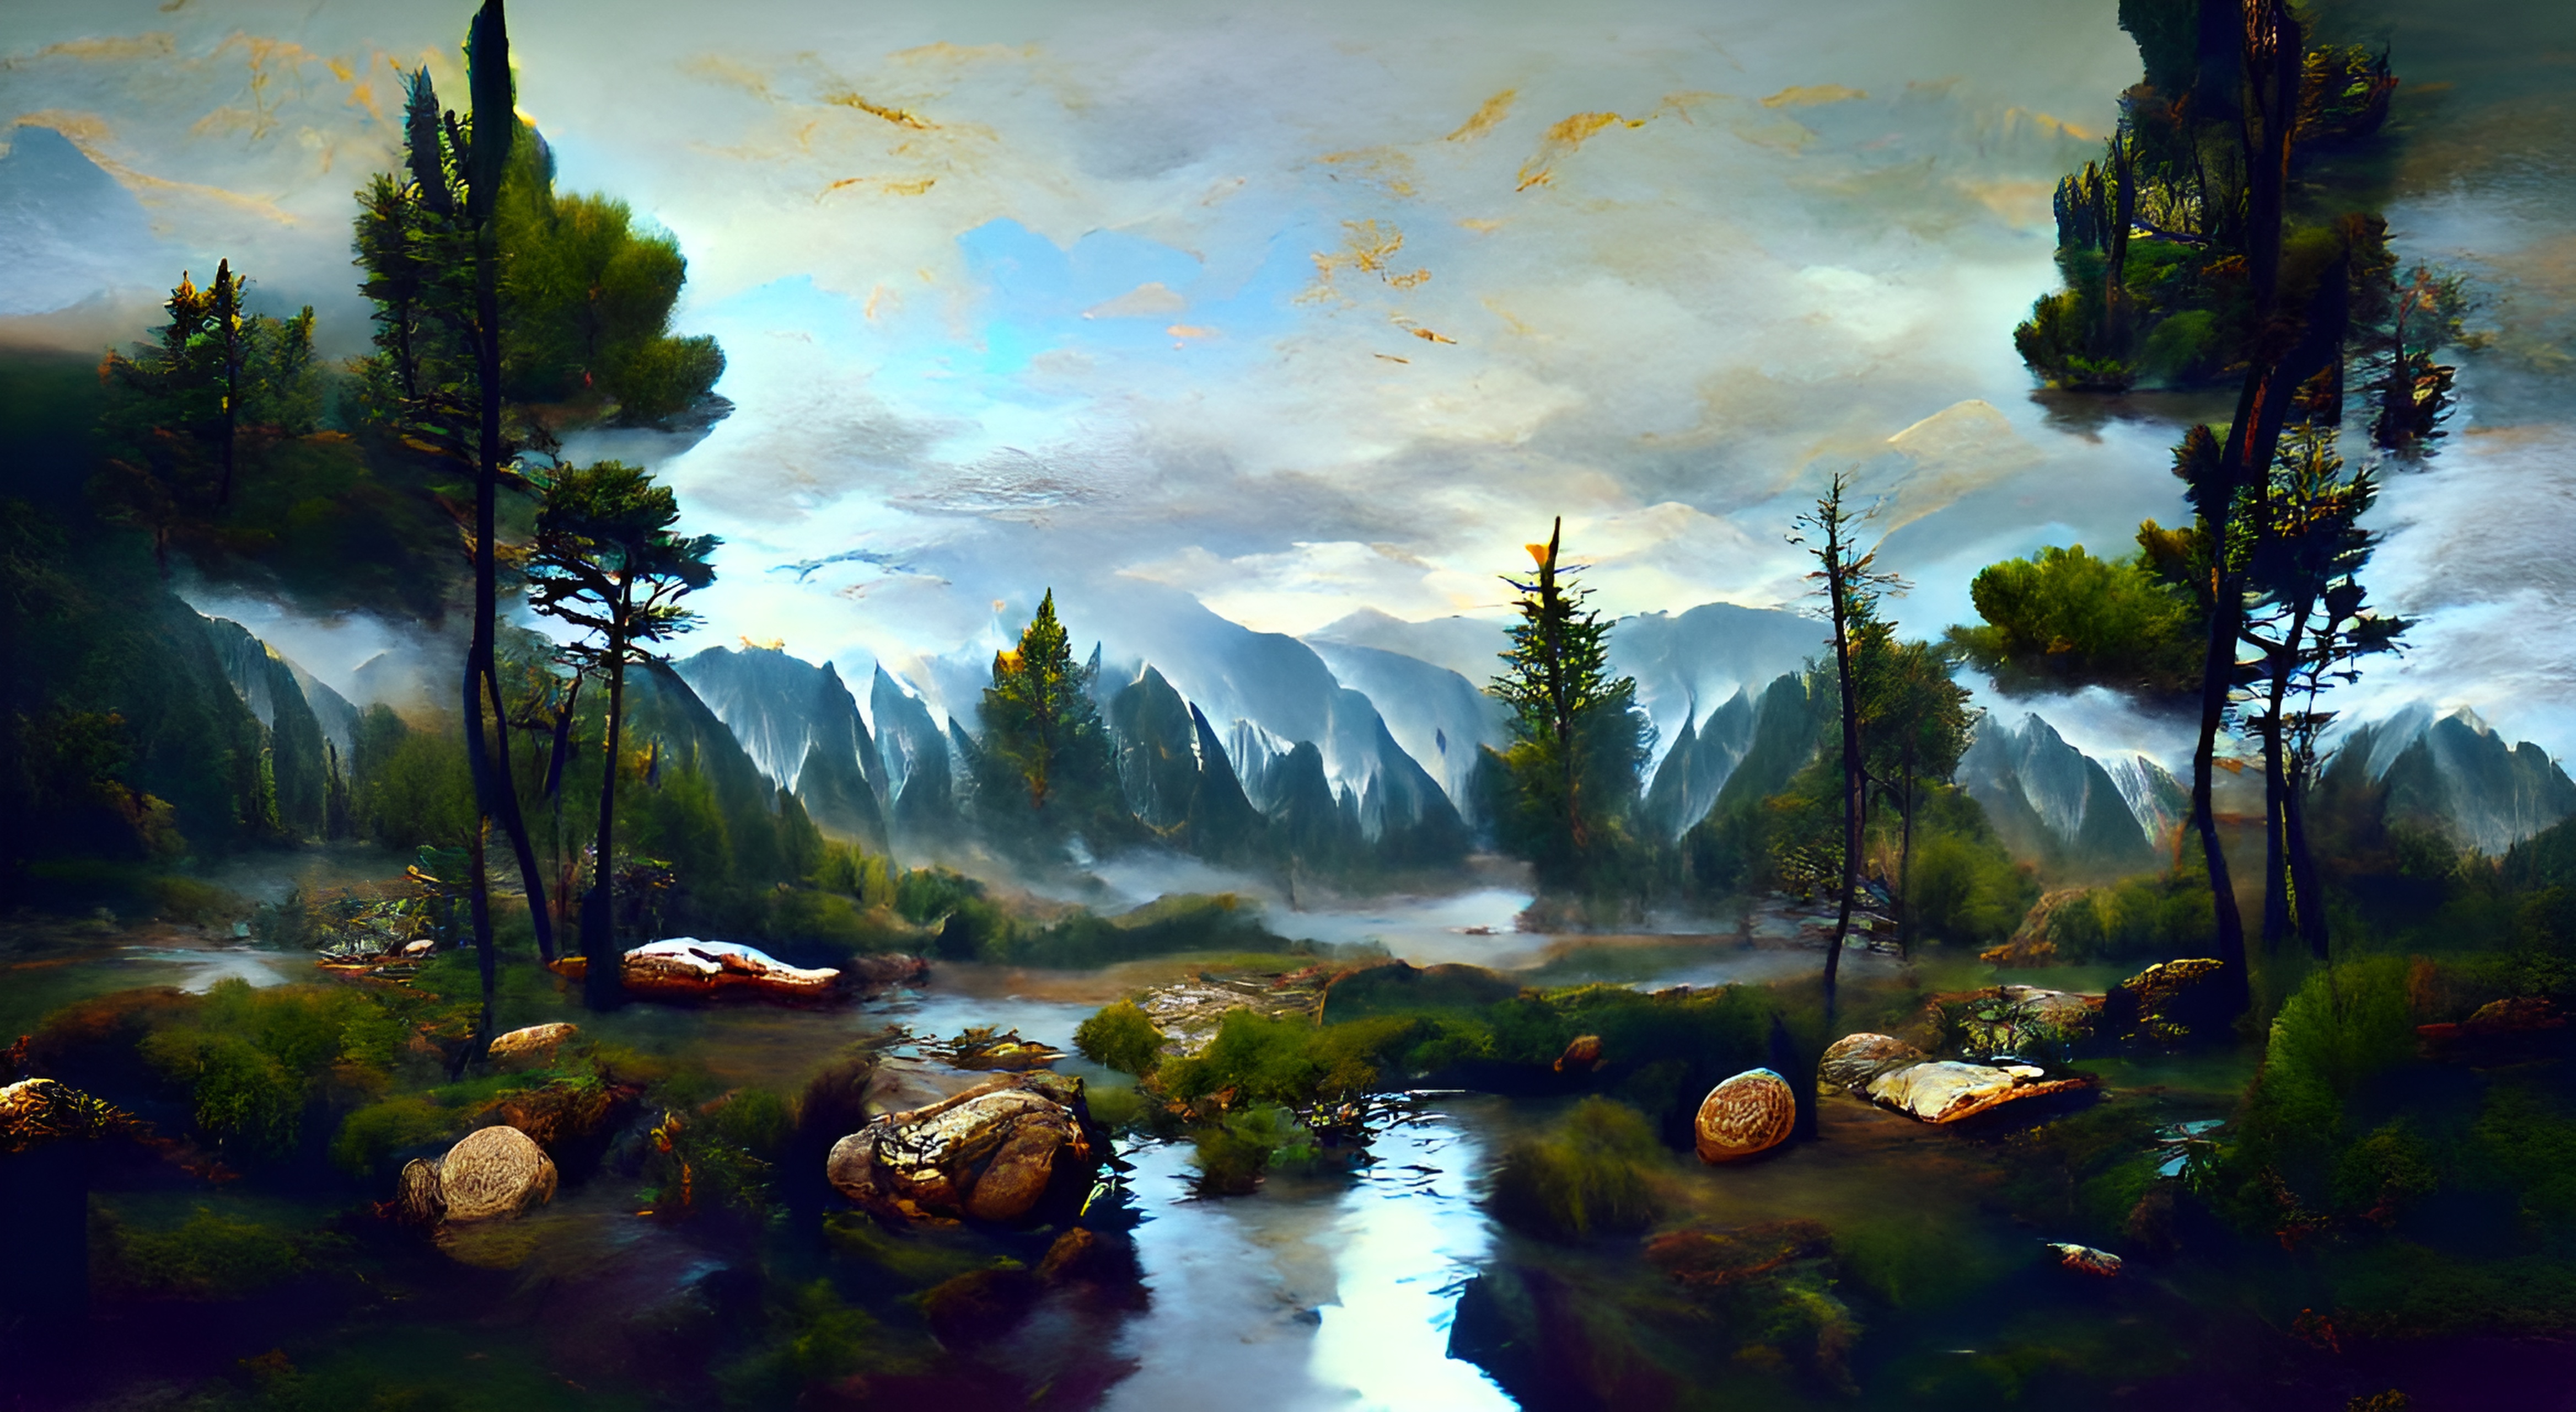 File:Scenic Valley in the Afternoon Artistic (VQGAN+CLIP).jpg - Wikipedia